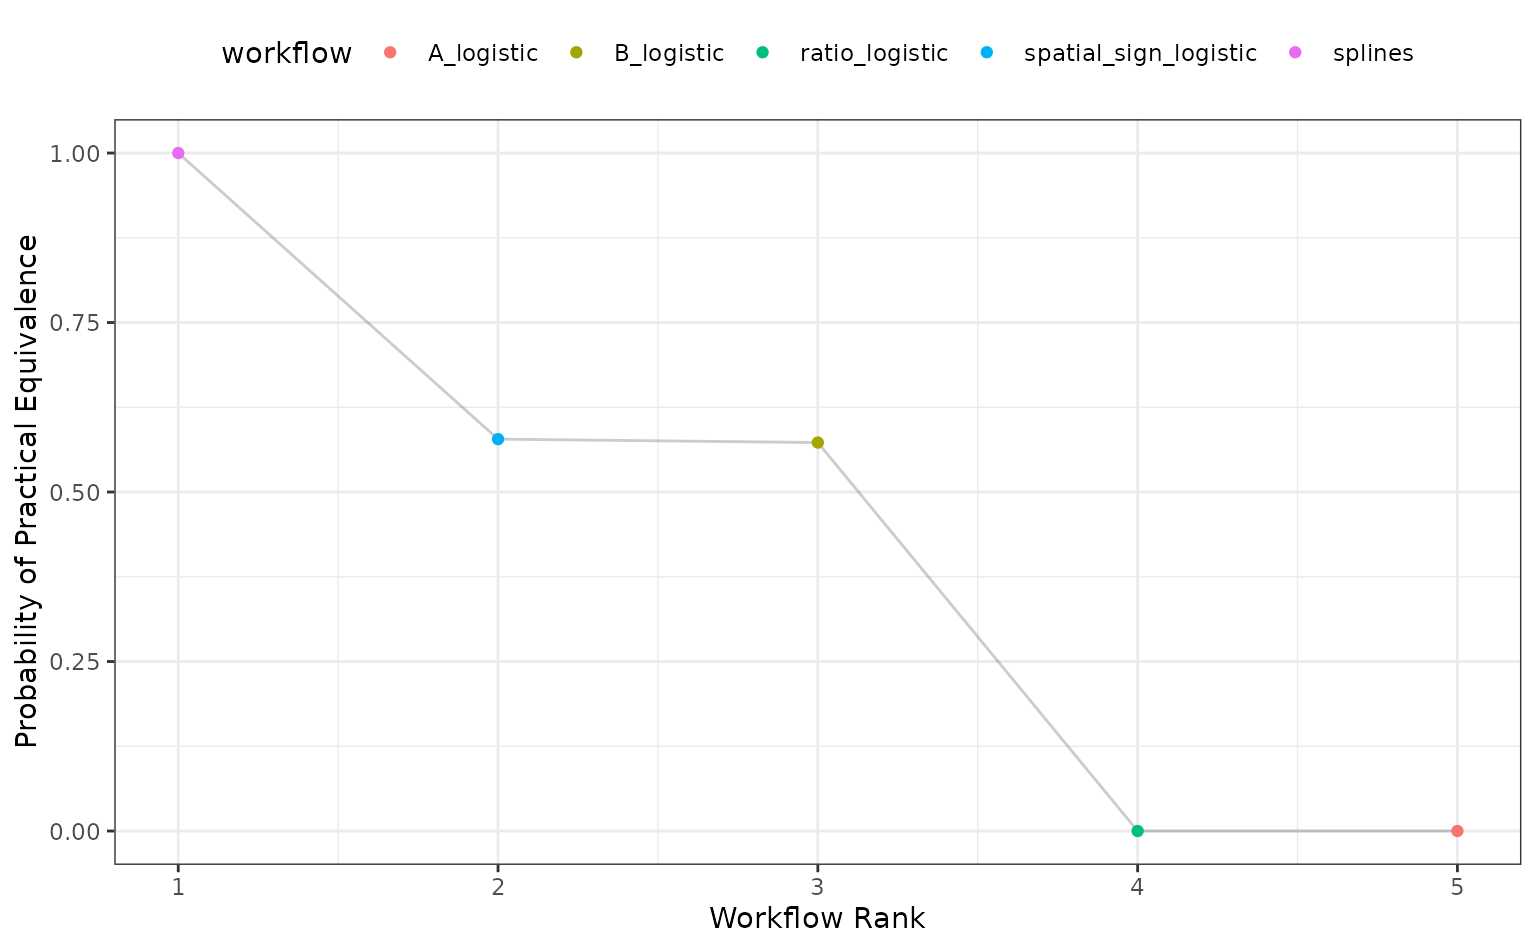 Connected line chart. Workflow Rank along the x-axis, Probability of Practical Equivalence along the y axis. Splines has value of 1. spatial_sign_logistic has value of 0.6, B_logistic has a value of 0.575, ratio_logistic and A_logistic both has a value of 0.